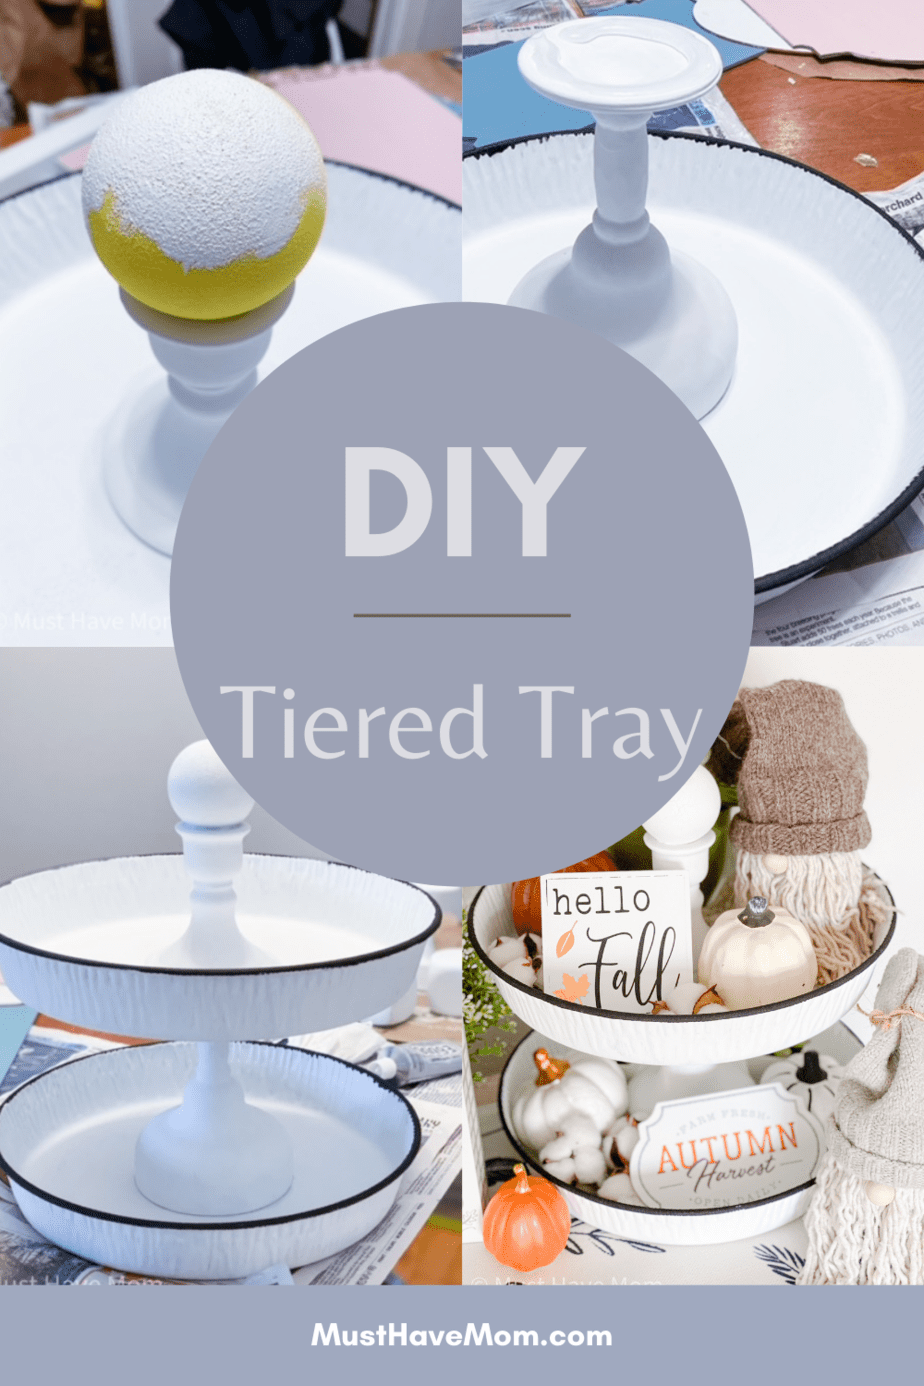 Tiered trays are all the rage in farmhouse style but they can be expensive. I'll show you have to make your own DIY Tiered Tray for cheap. #MustHaveMom #tieredtray #DIY #farmhouse